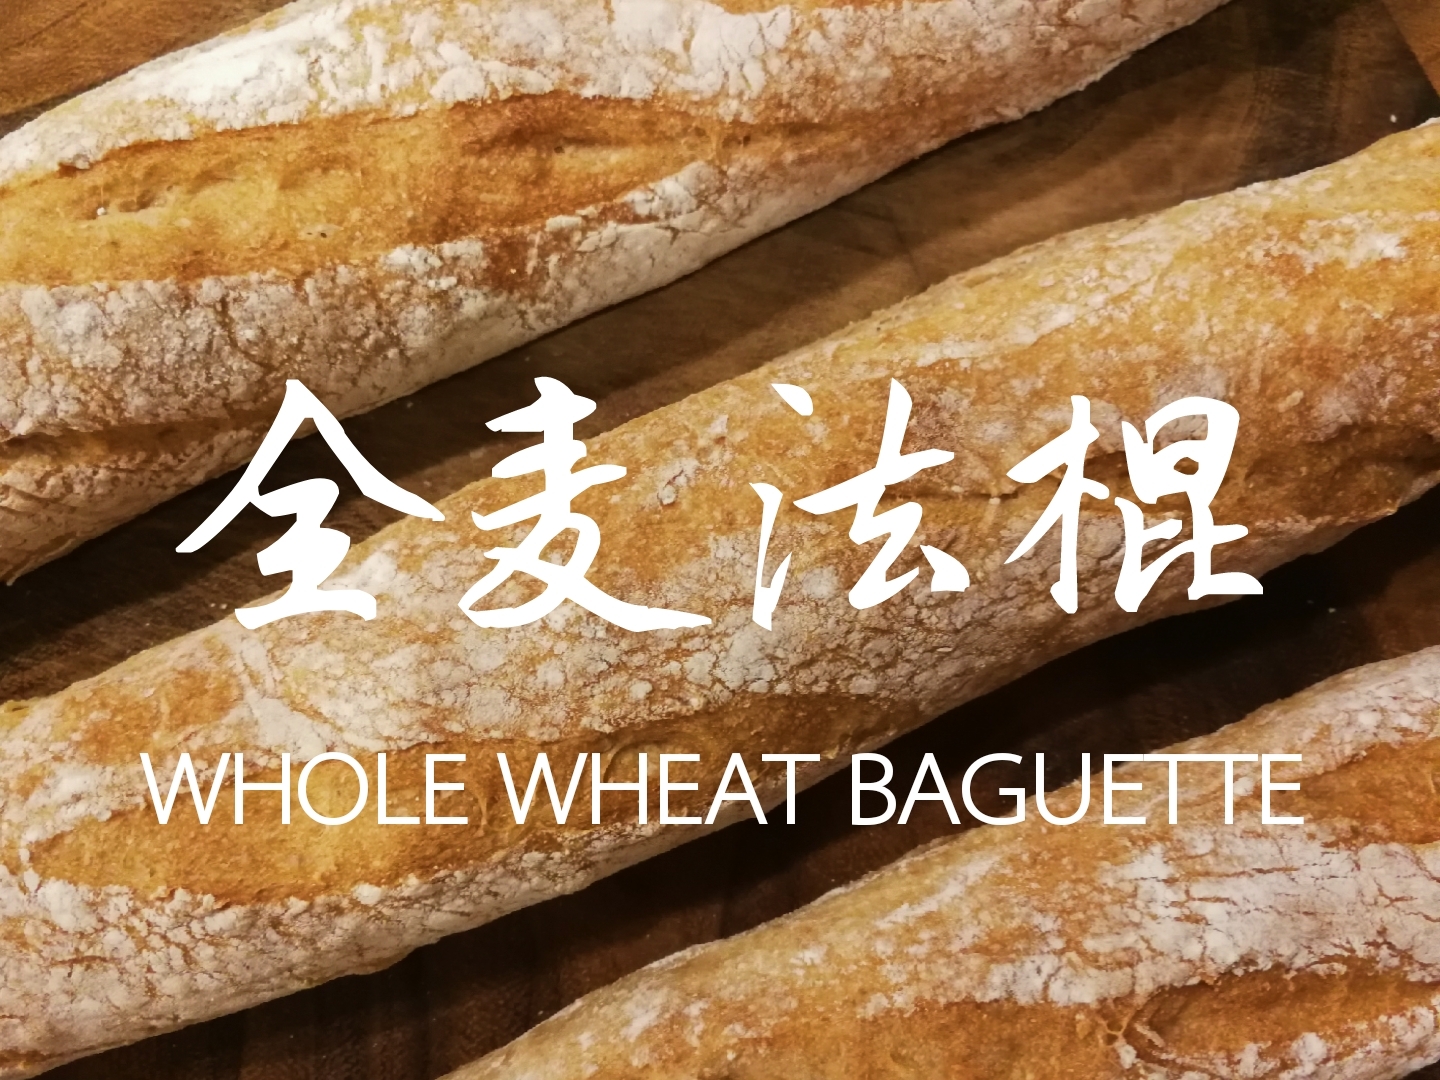 
The practice of the Whole Wheat Baguette of rod of whole wheat law of sweet fragile health